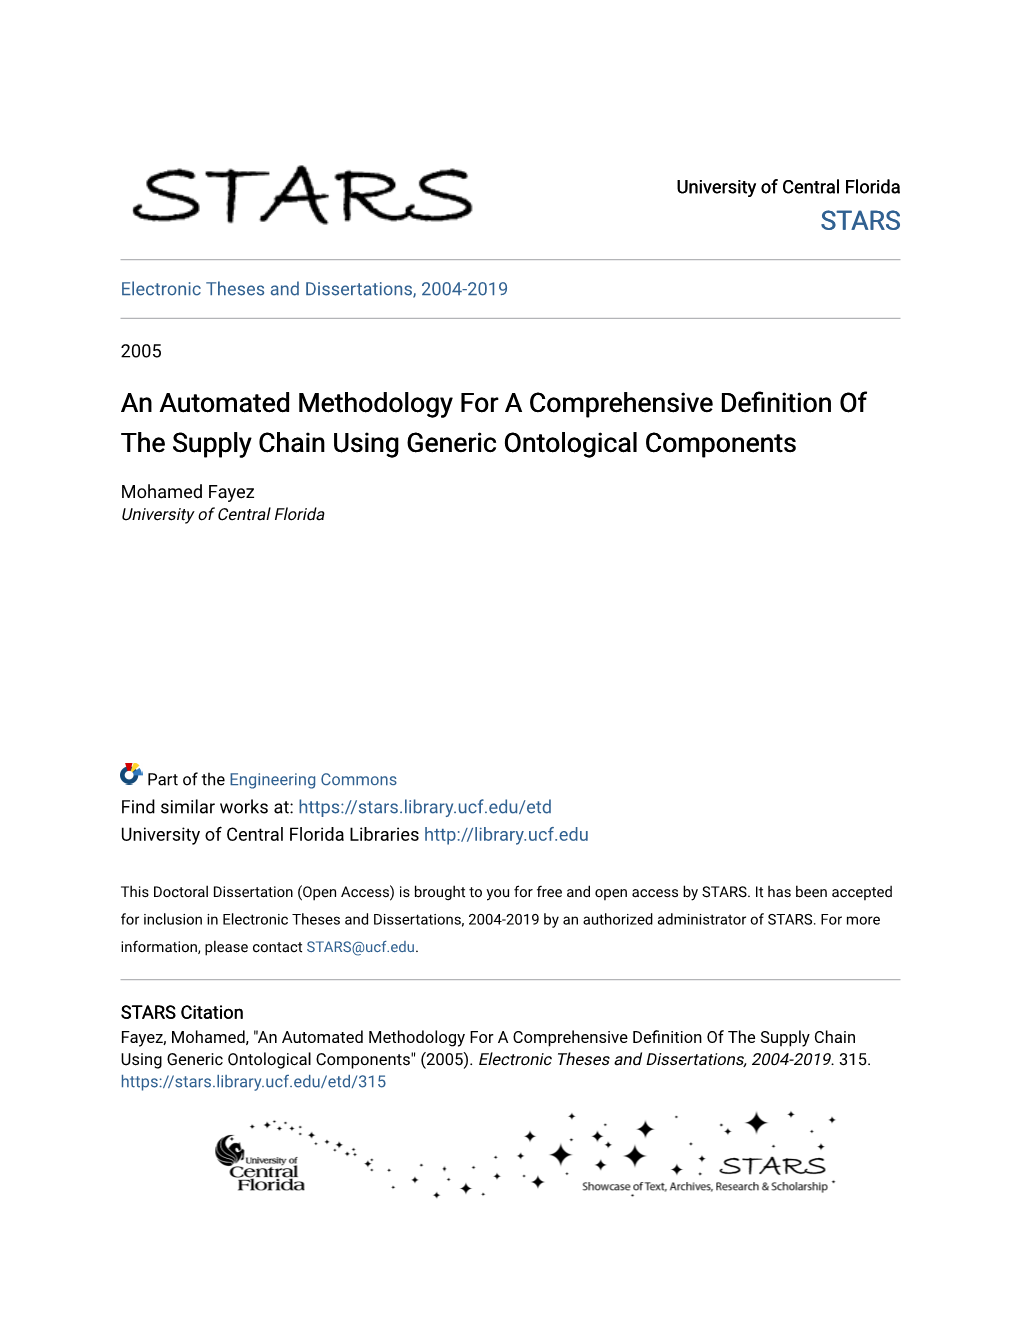 An Automated Methodology for a Comprehensive Definition of the Supply Chain Using Generic Ontological Components